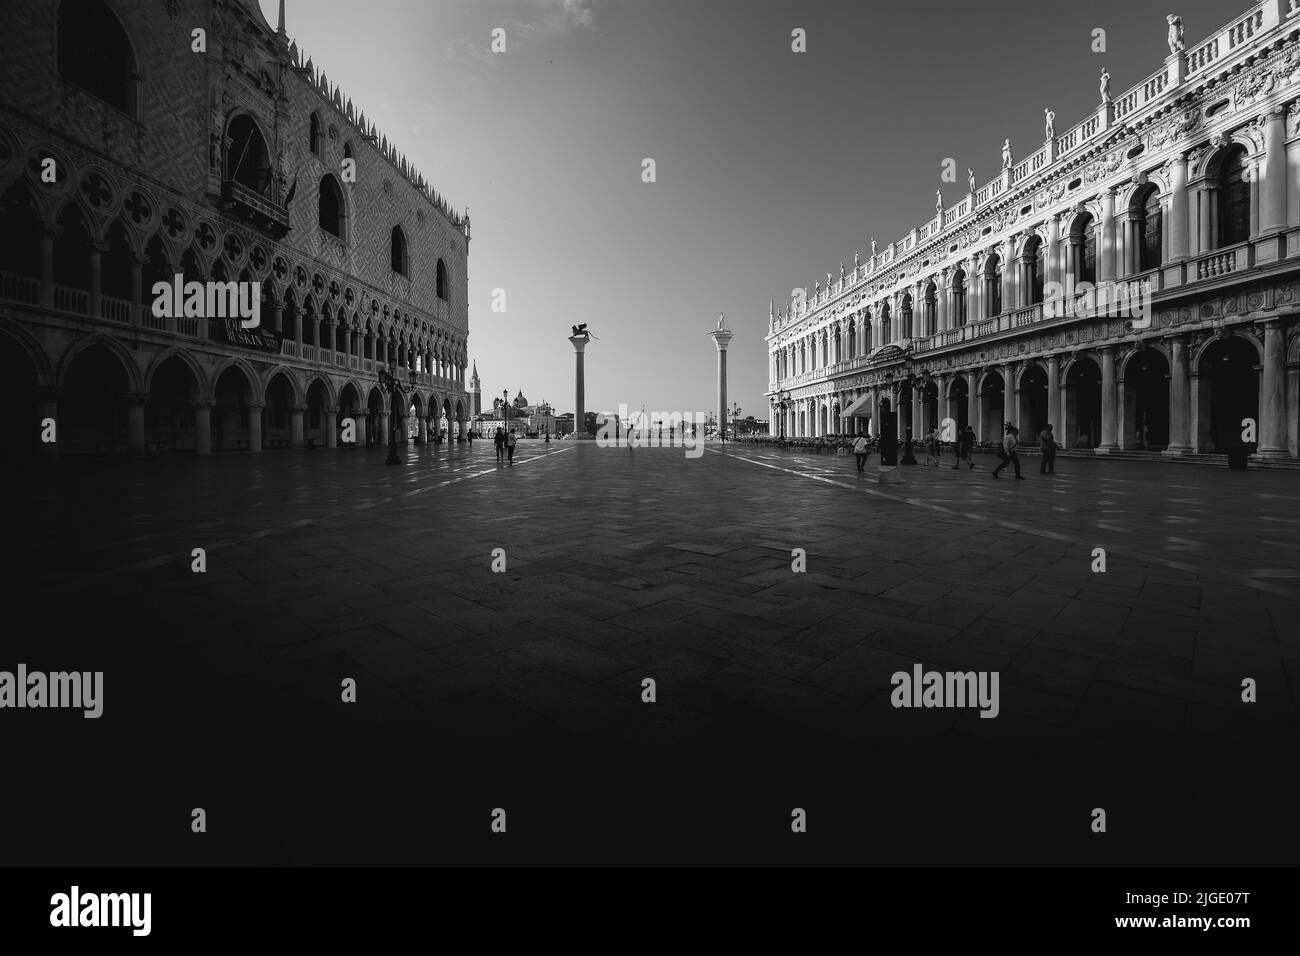 Early in the morning on St. Mark's Square in Venice Stock Photo